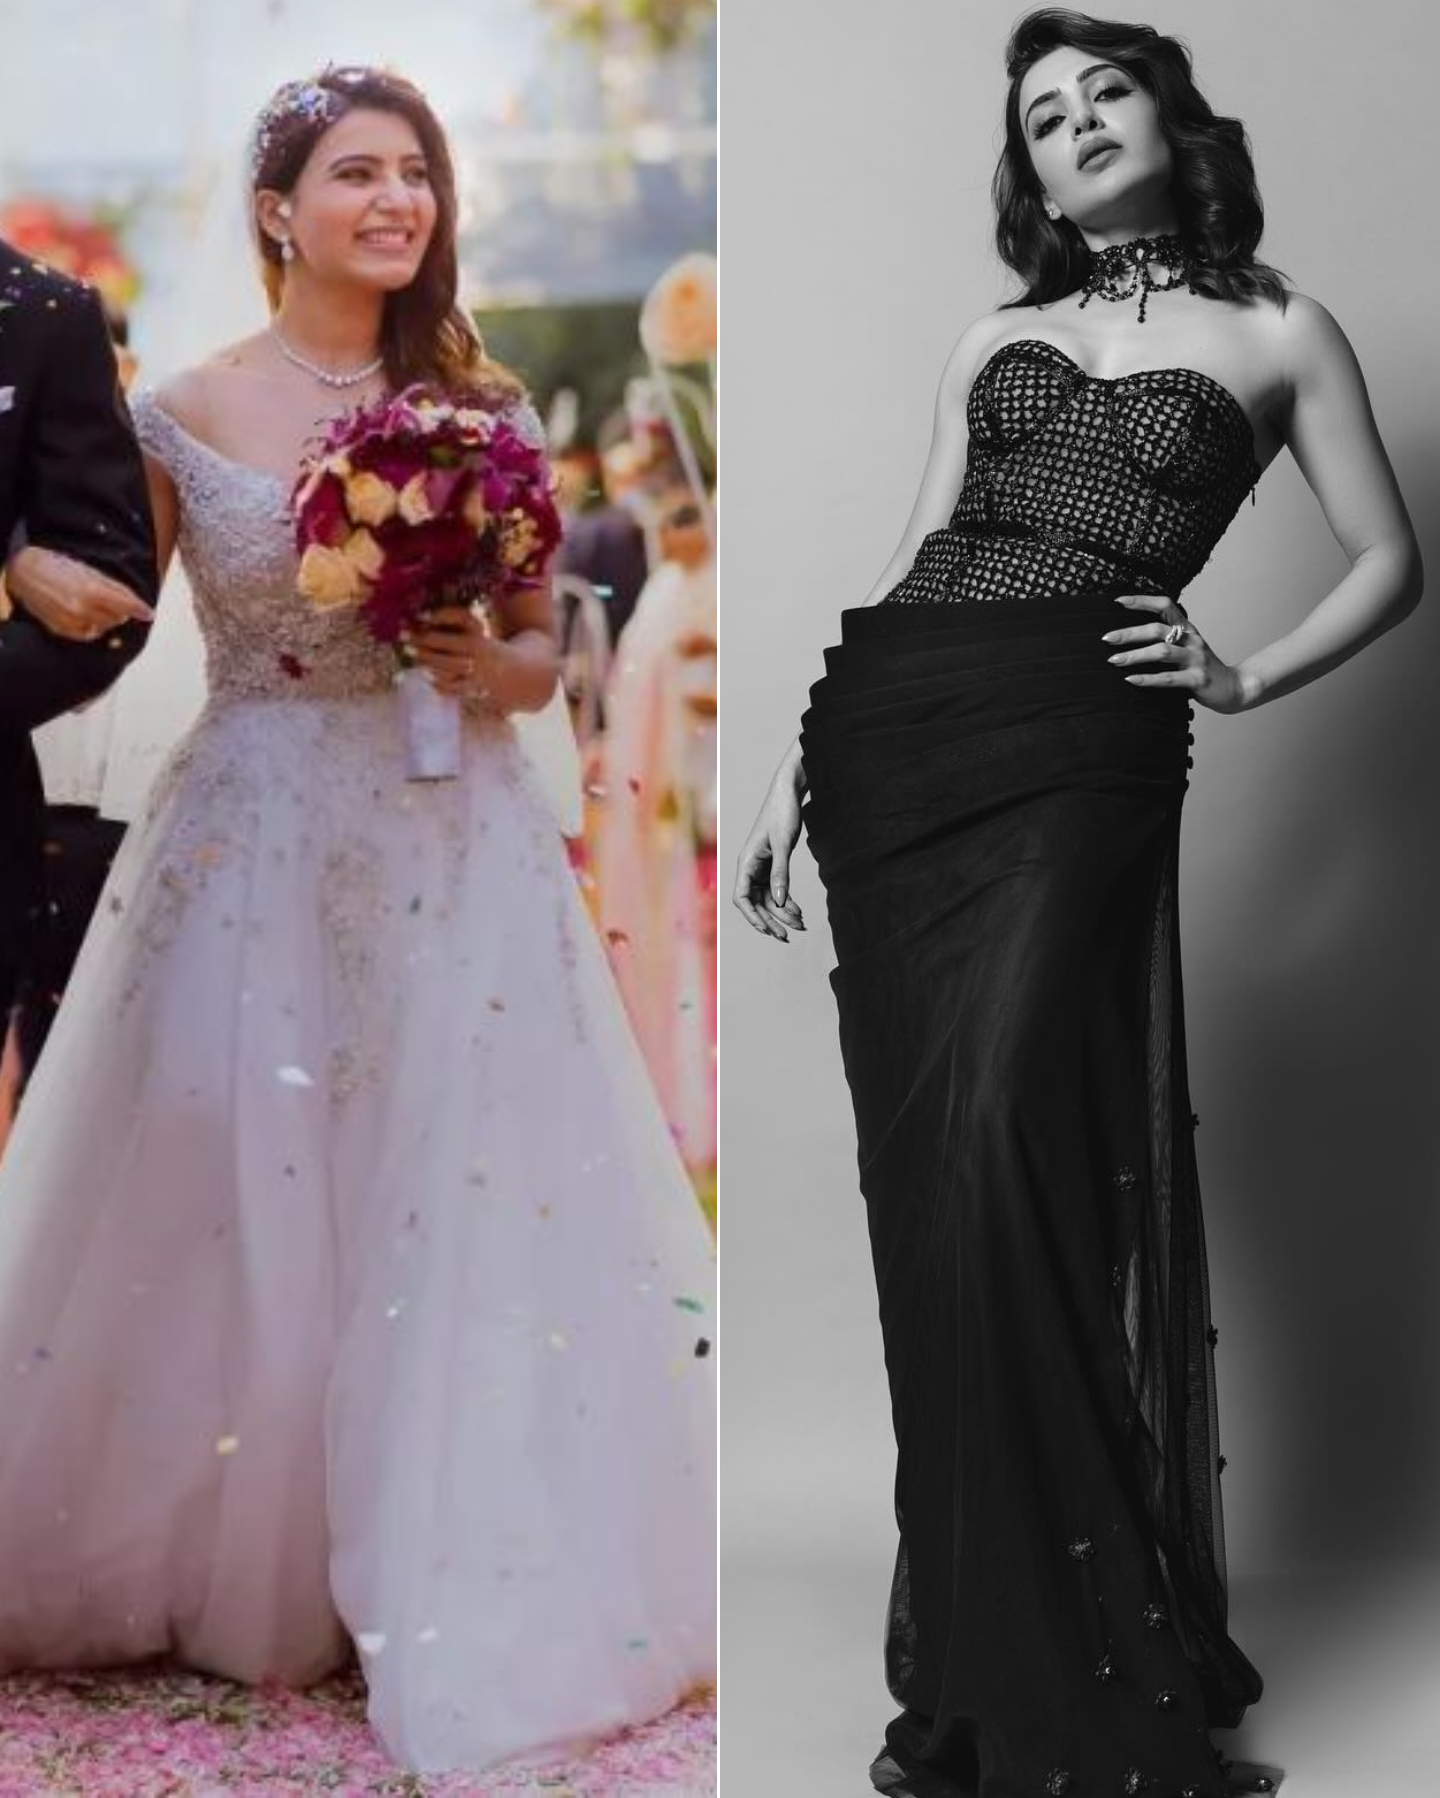 Samantha Ruth Prabhu repurposed her wedding gown and dyed it in black